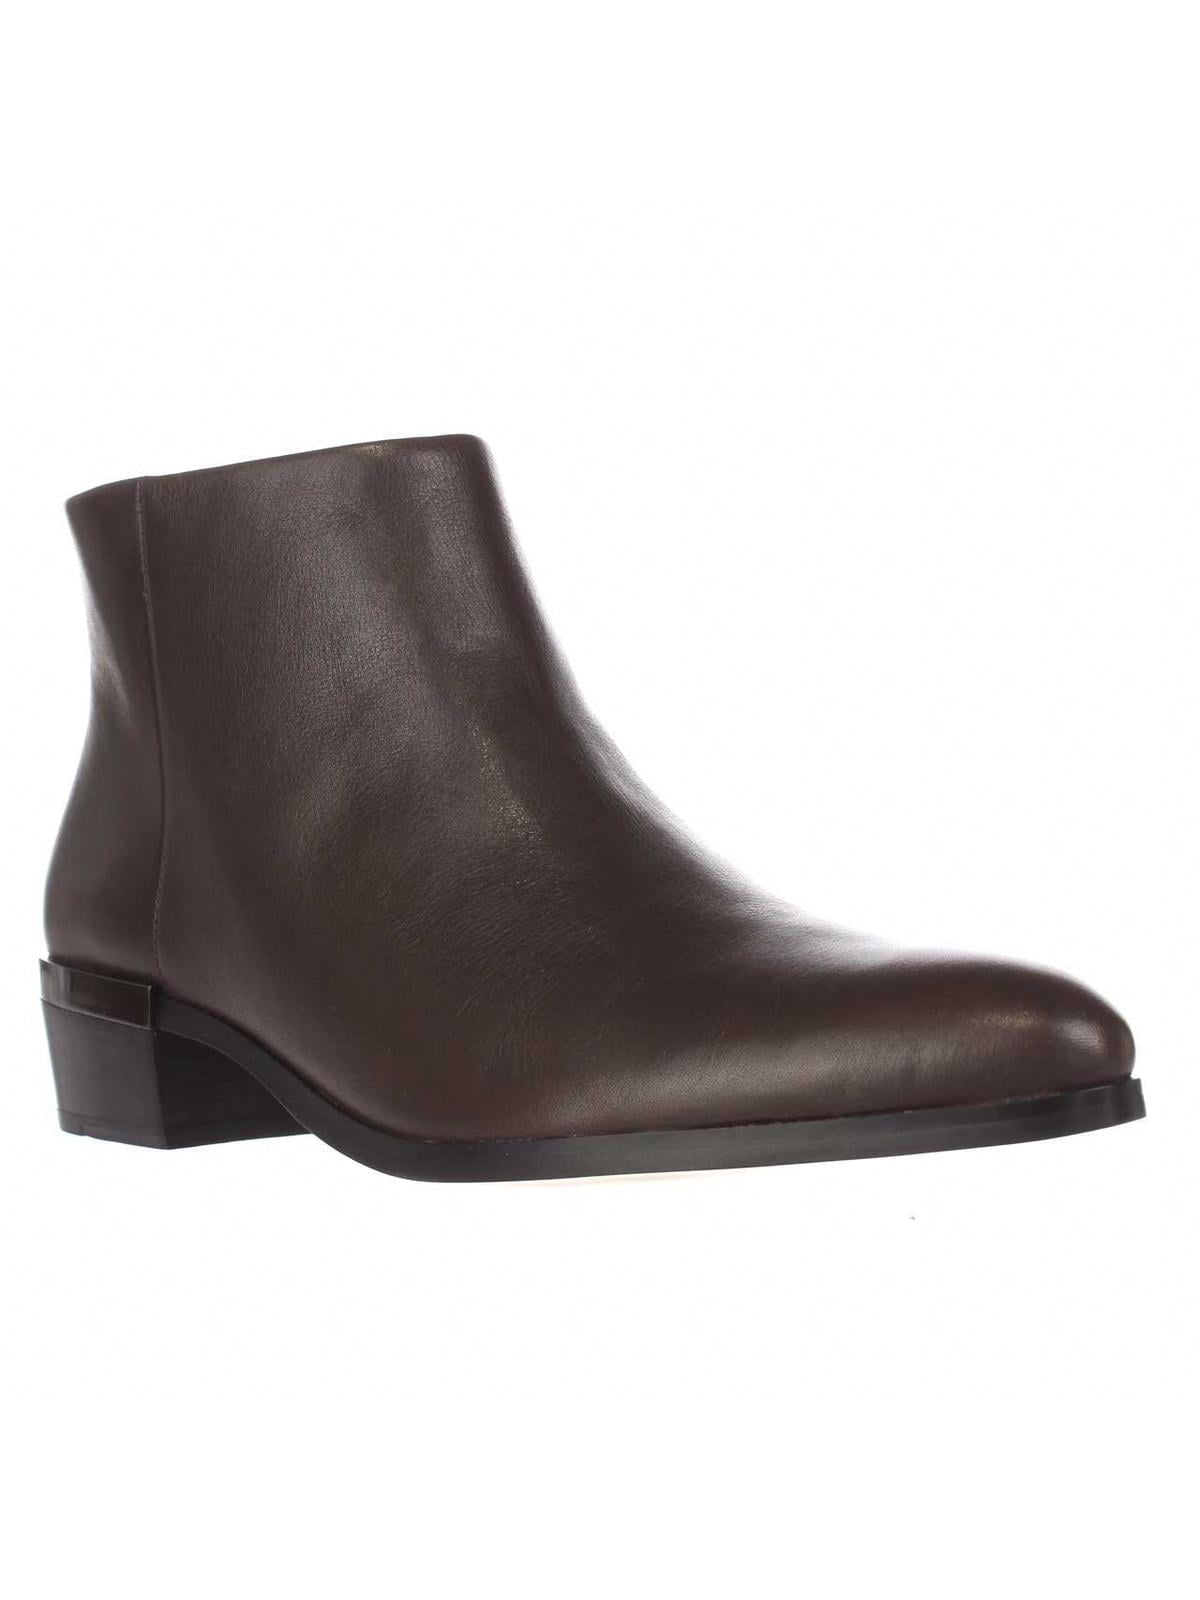 coach ankle boots on sale